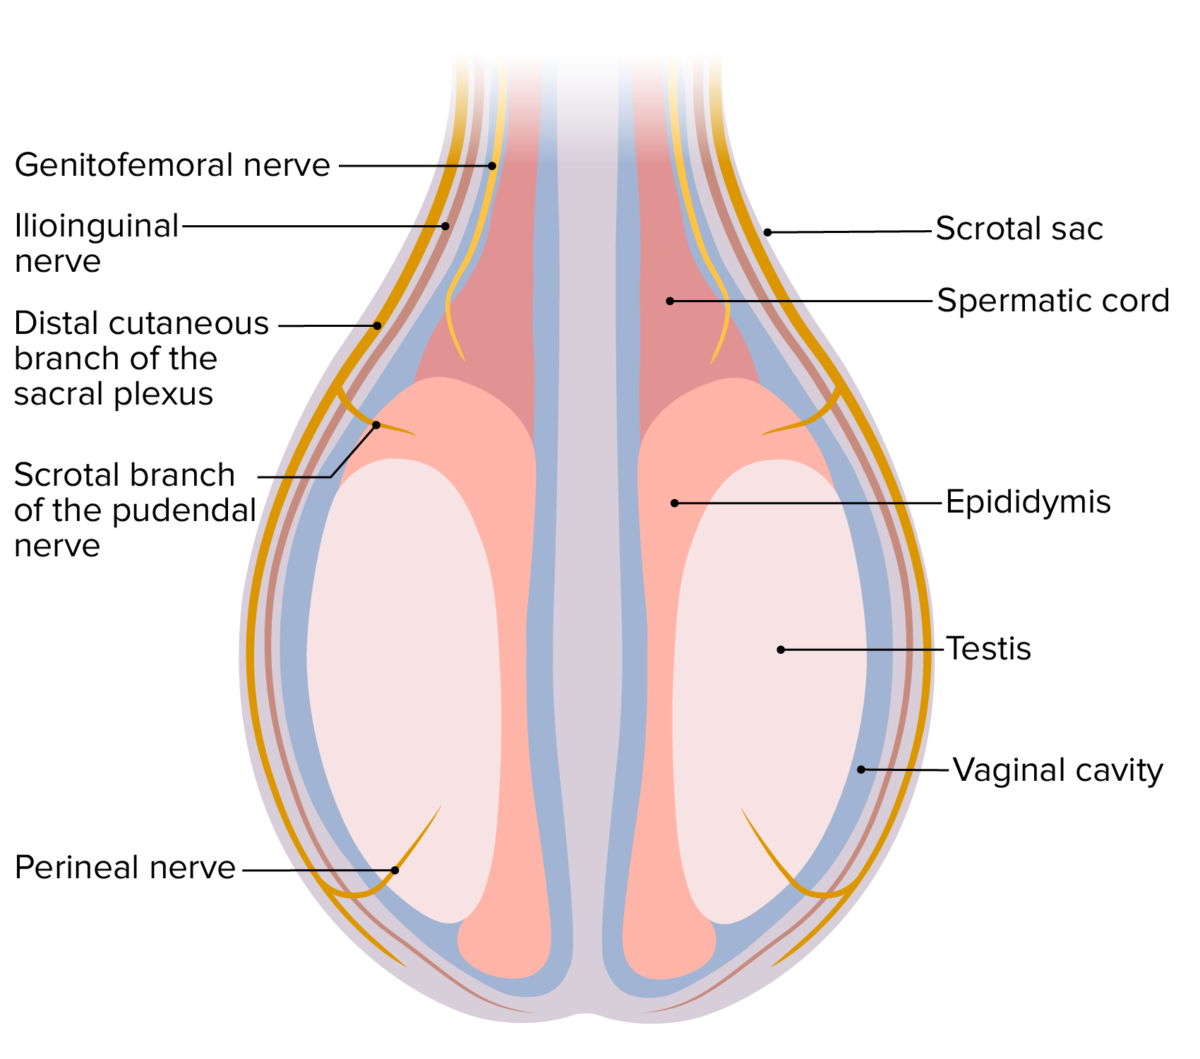 Nerve supply to the testis